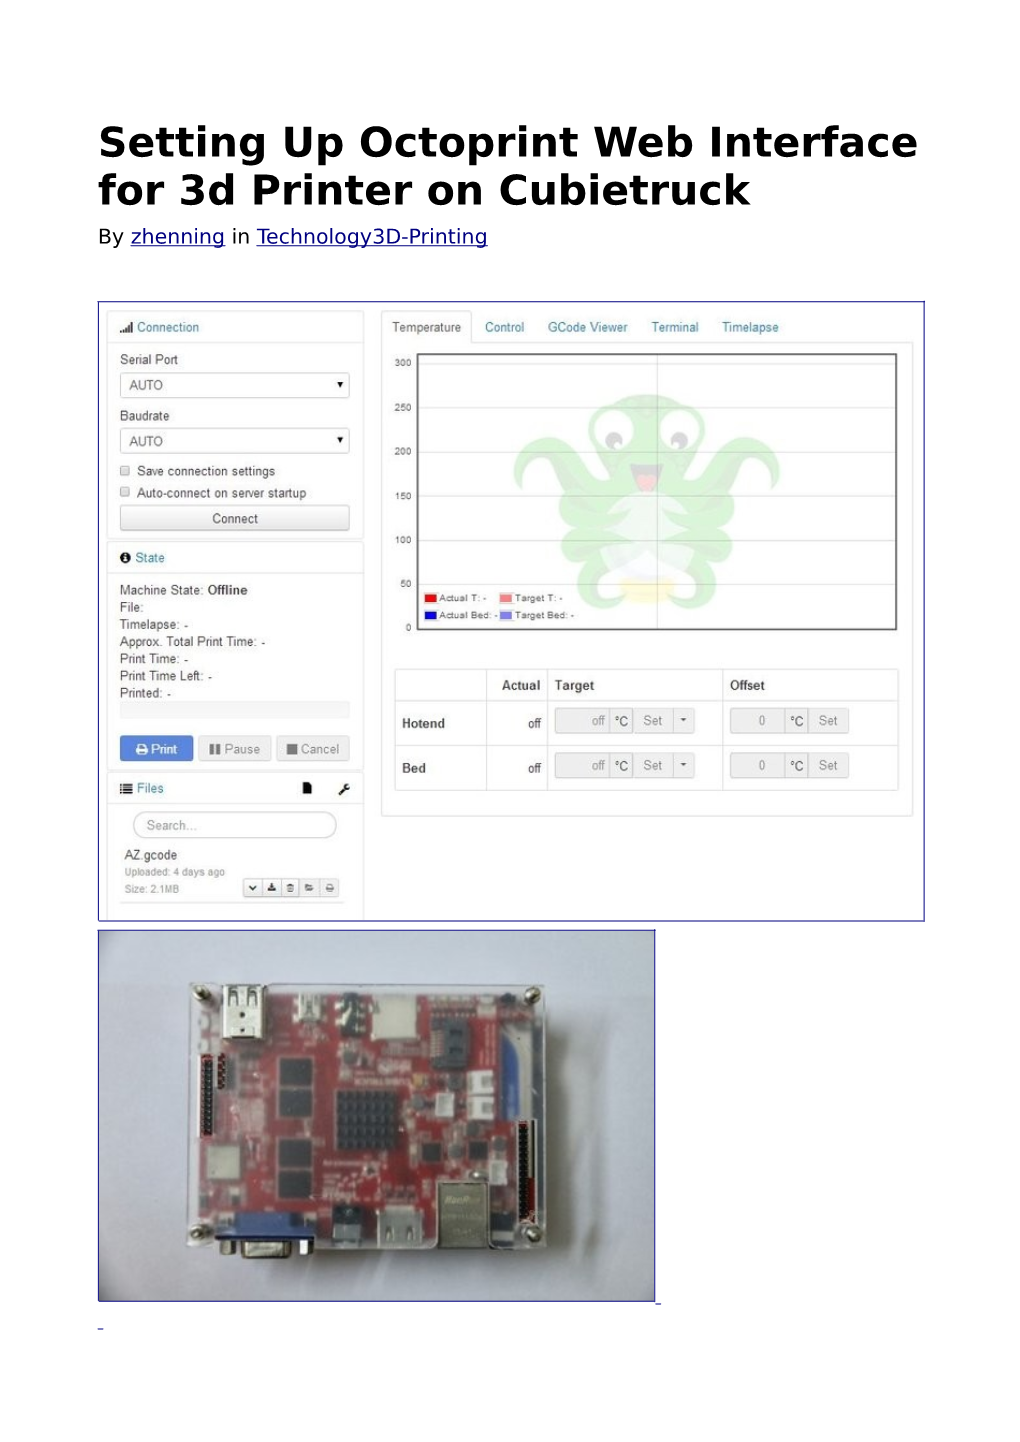 Setting up Octoprint Web Interface for 3D Printer on Cubietruck by Zhenning in Technology 3D-Printing